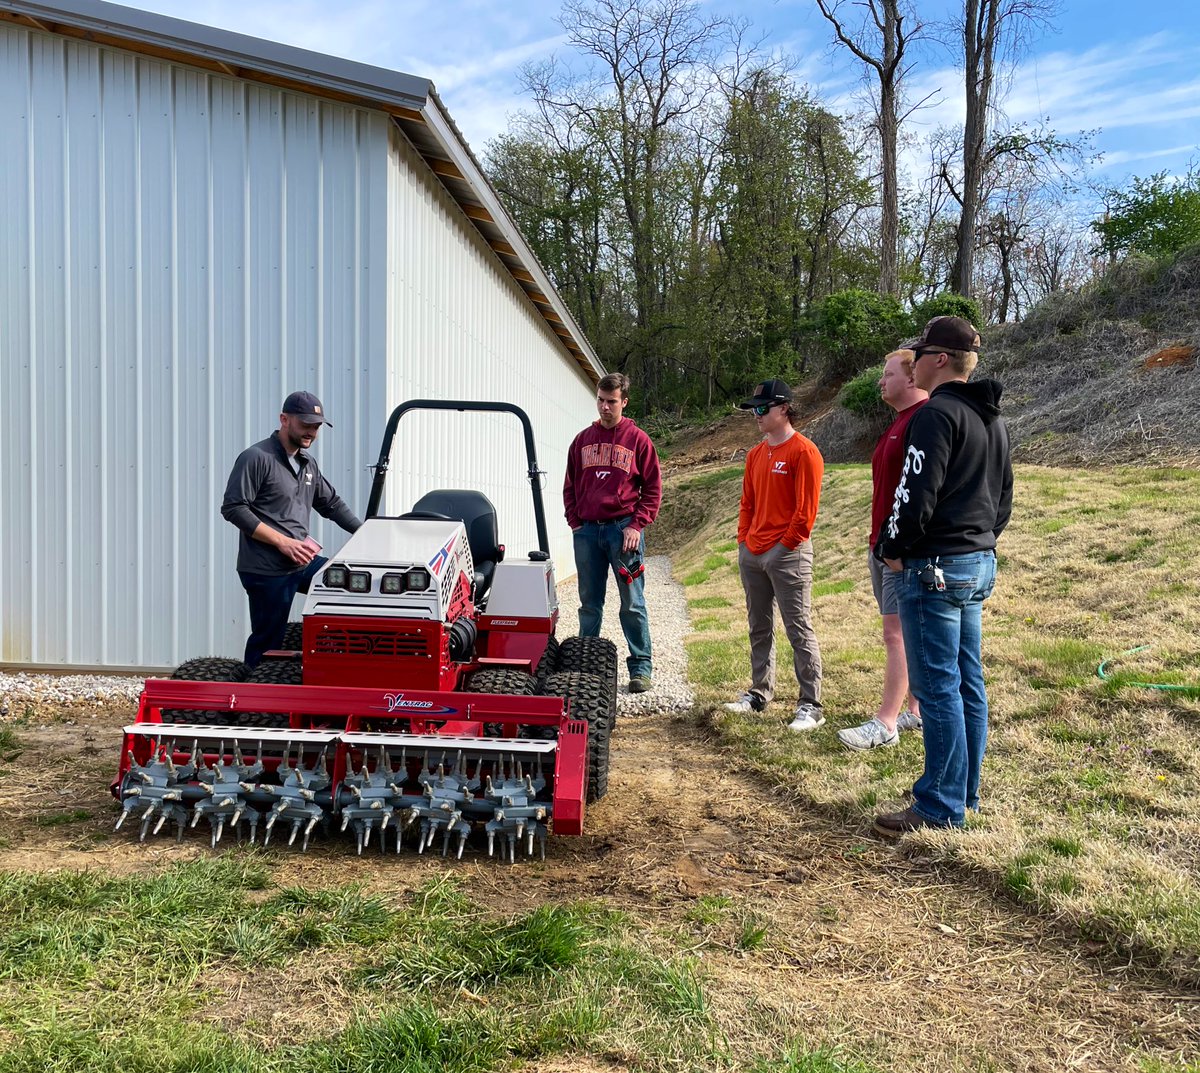 THANK YOU #Turfgrass Research Center mgr. John Hinson for teaching @VTTurfgrass seniors about using specialized turf equipment. Students learned how to operate a @TheToroCompany TX1000 Dingo, mow using a @LastecMowers XF200 deck, & cultivate the surface w/ a @Ventrac Aera-Vator.